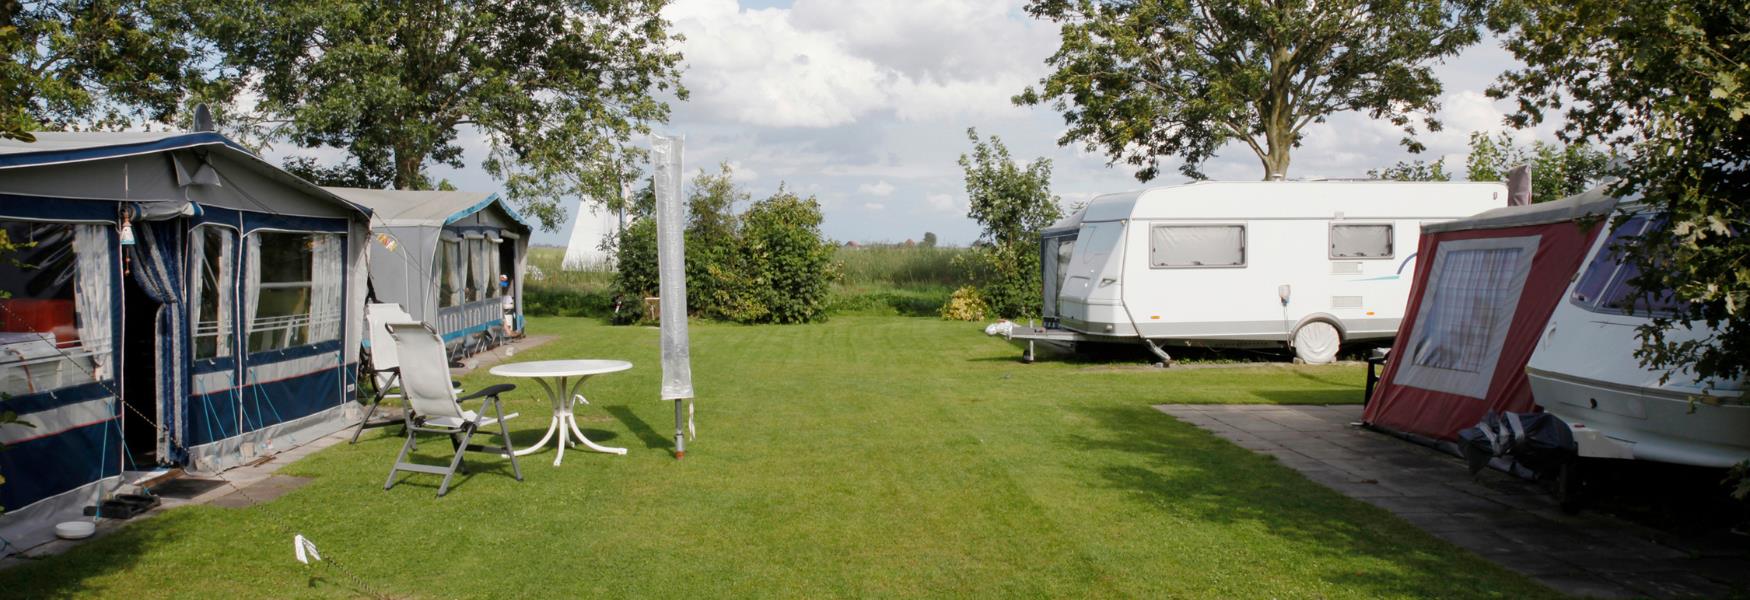 image shows caravans at a holiday park in bedfordshire